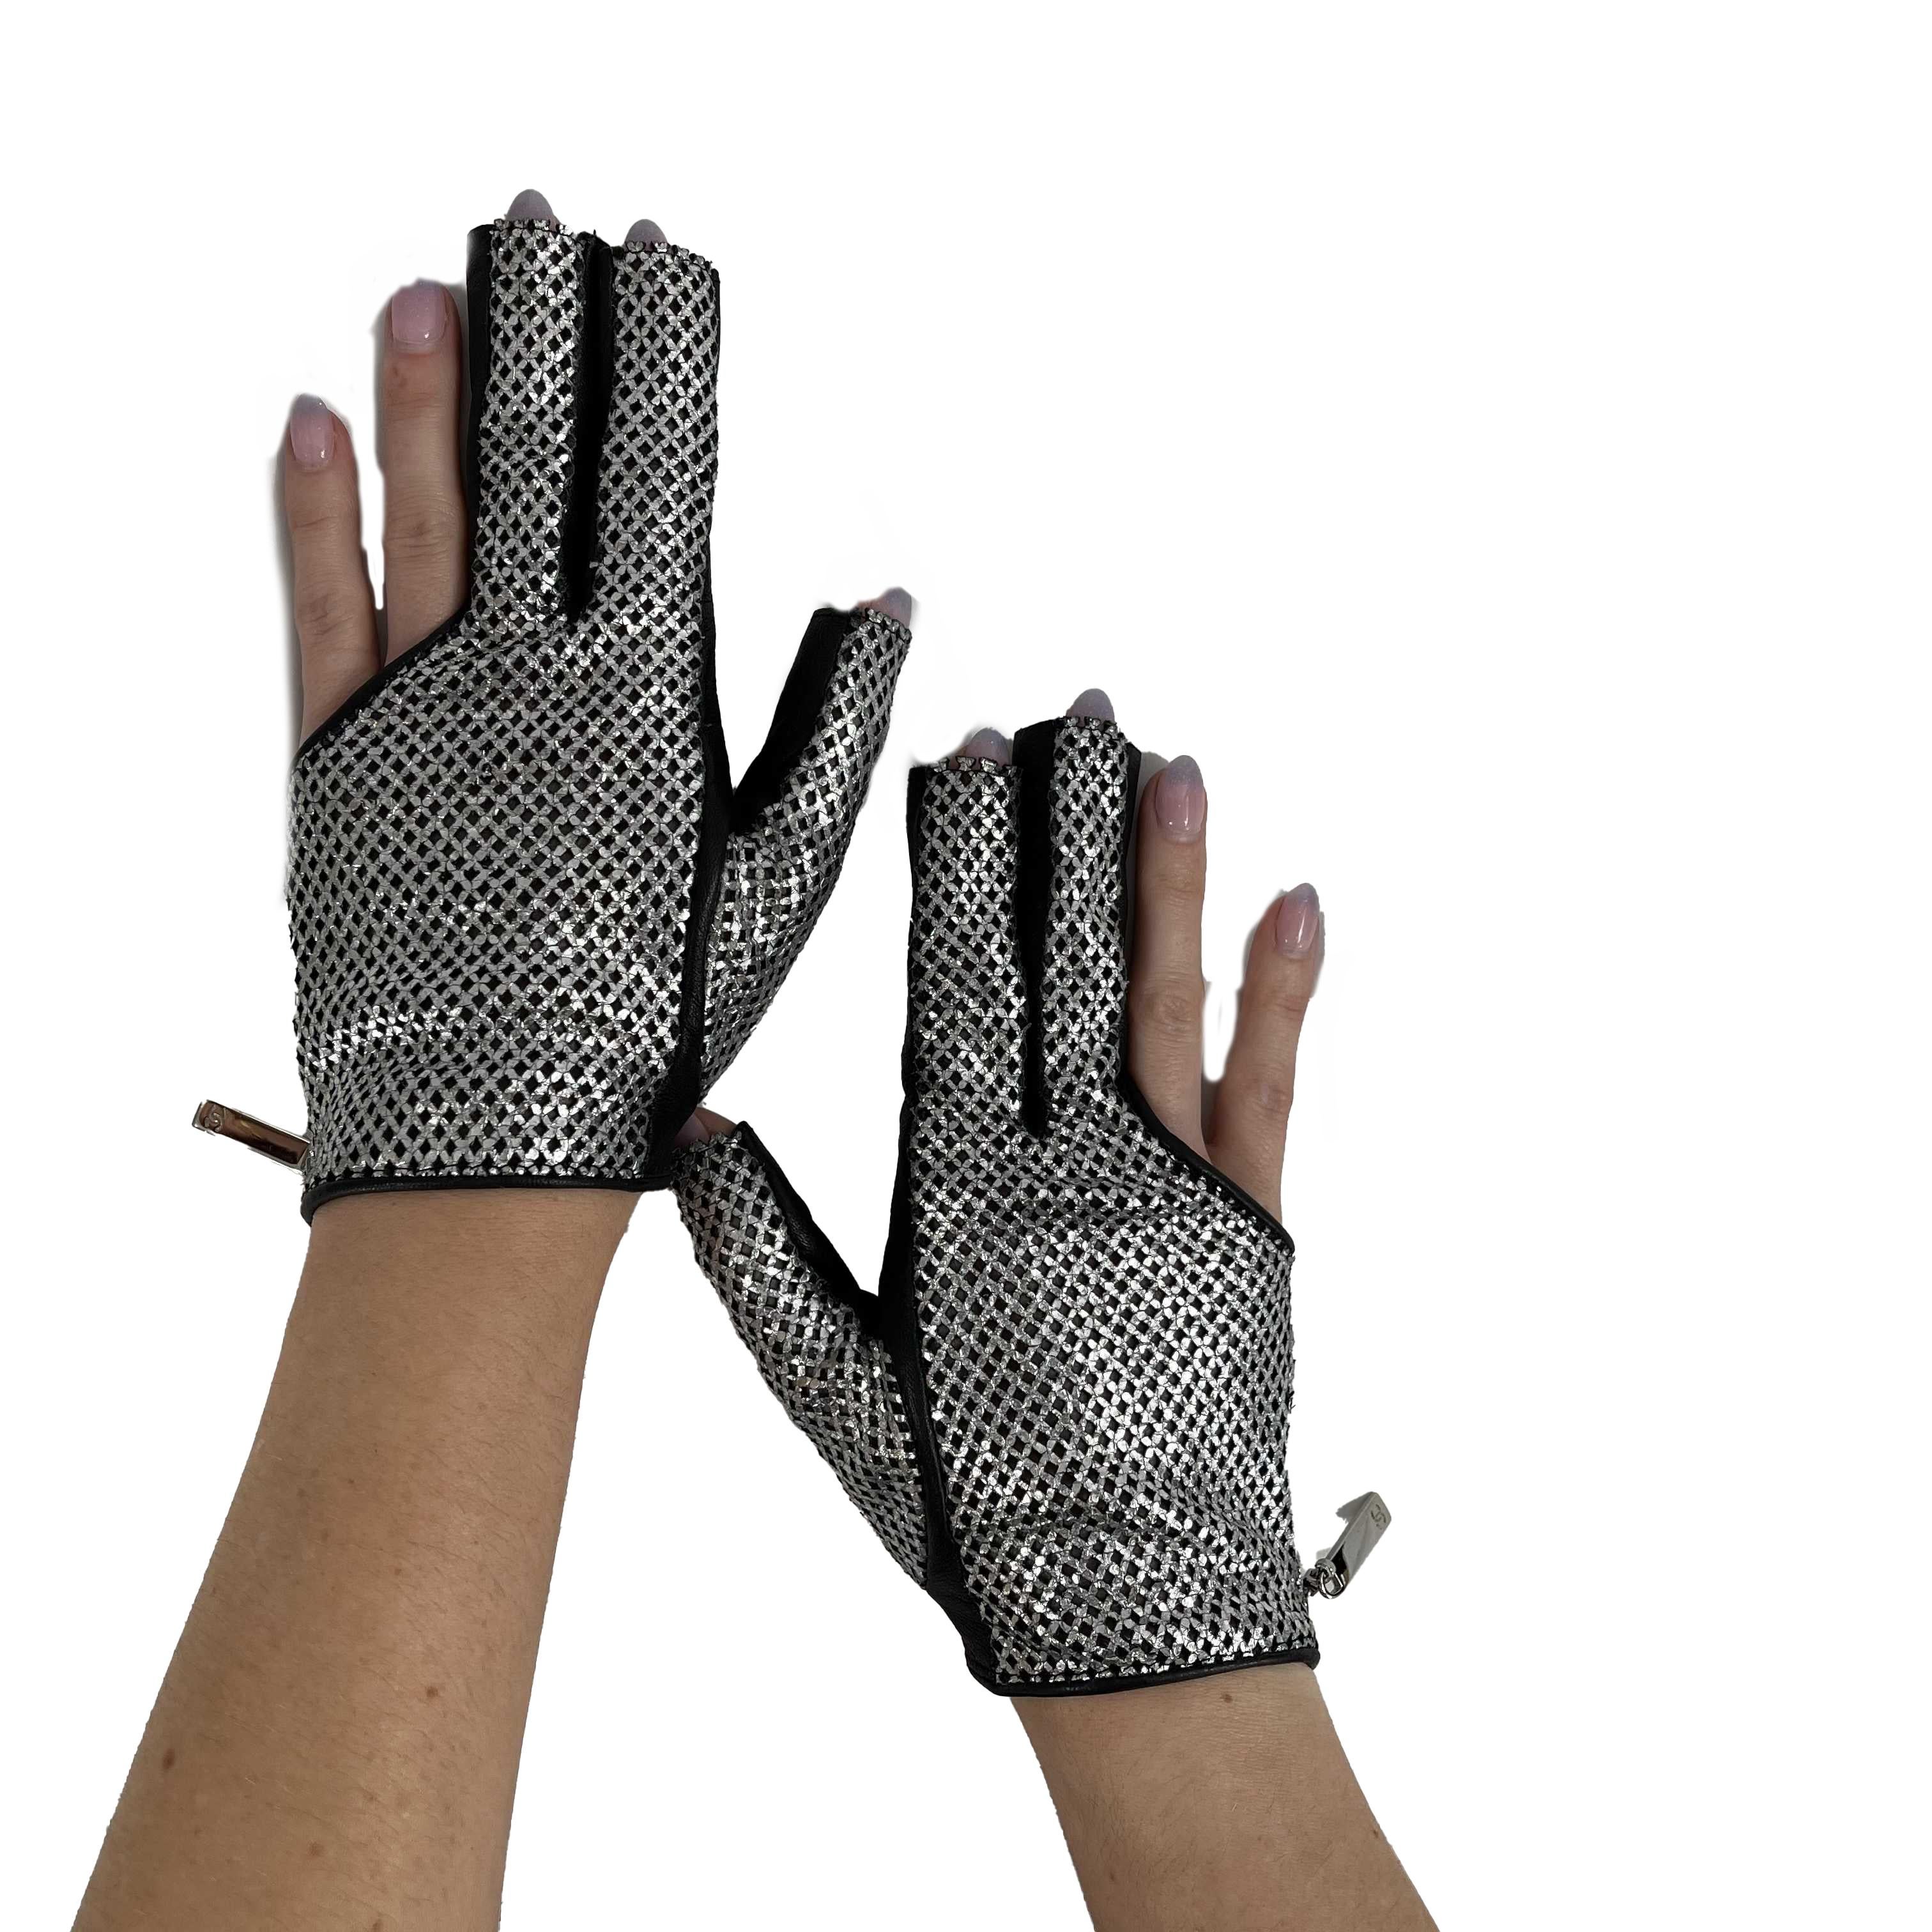 CHANEL 2008 Act 1 Black / Metallic Silver Mesh Leather Gloves 7.5 7